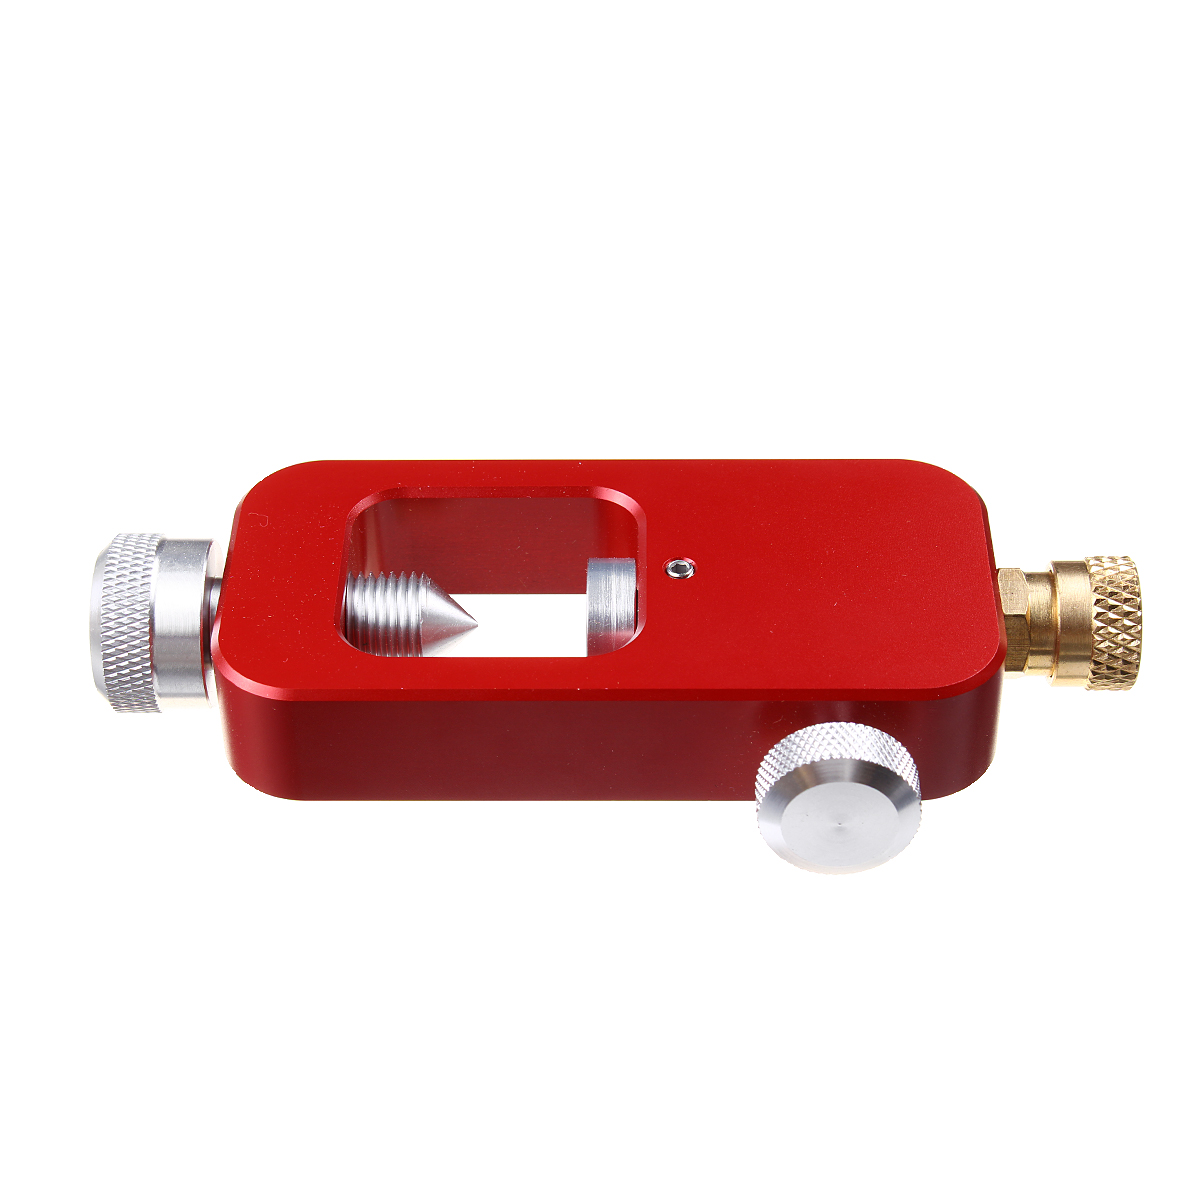 Scuba Adapter Snorkeling Diving Large to Small Bottle 8MM Heads Valve for Swimming Cylinder Oxygen Tank